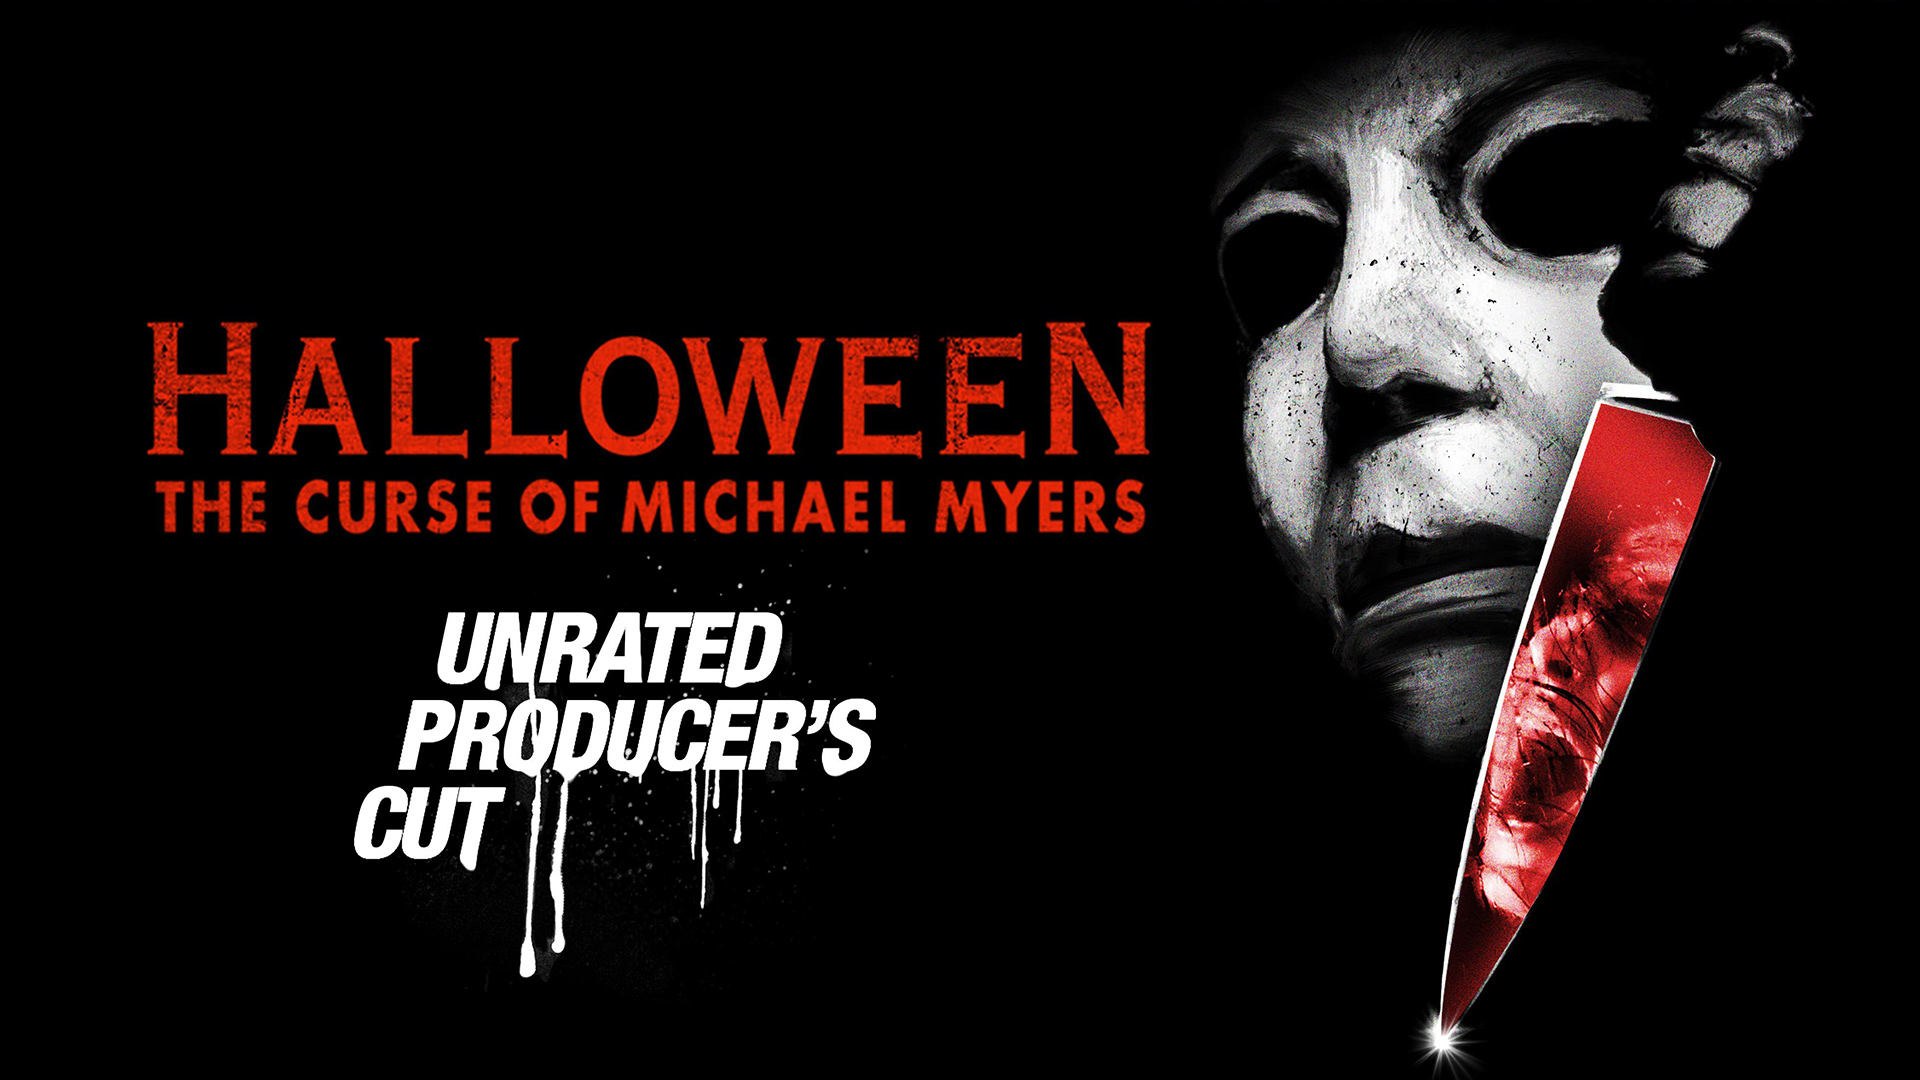 A promotional banner for the Unrated Producer's Cut of Halloween: The Curse of Michael Myers (1995).